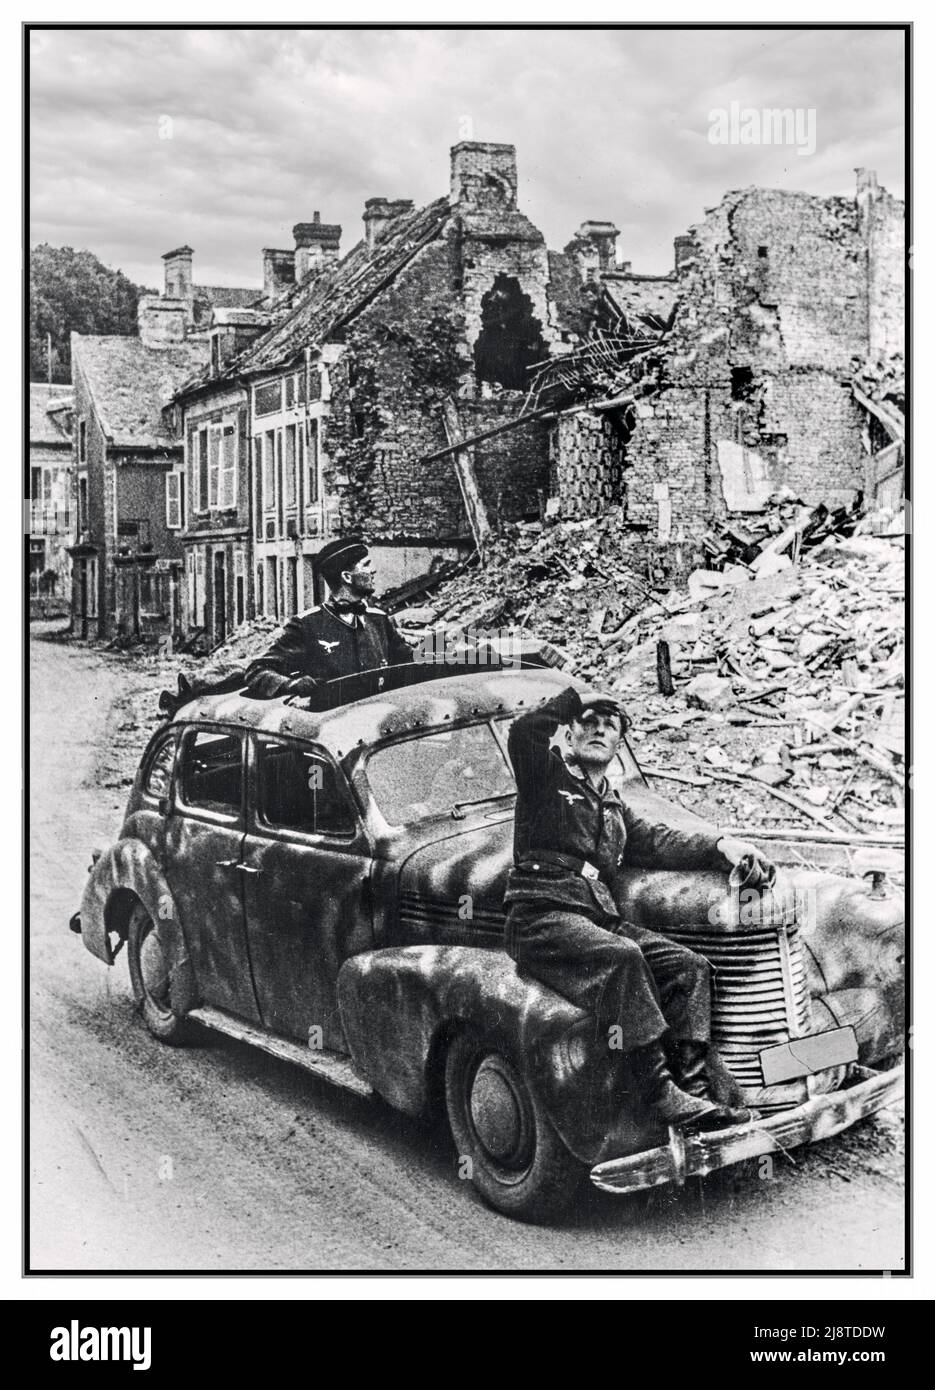 D-Day German ad hoc retreat in a camouflaged Opel 'Kapitan' staff car, with three Nazi German Wehrmacht soldiers watching out for allied attacks, driving and retreating amongst the ruins of a town in Normandy. Operation Overlord, Normandy landings D-Day France July 1944 Stock Photo